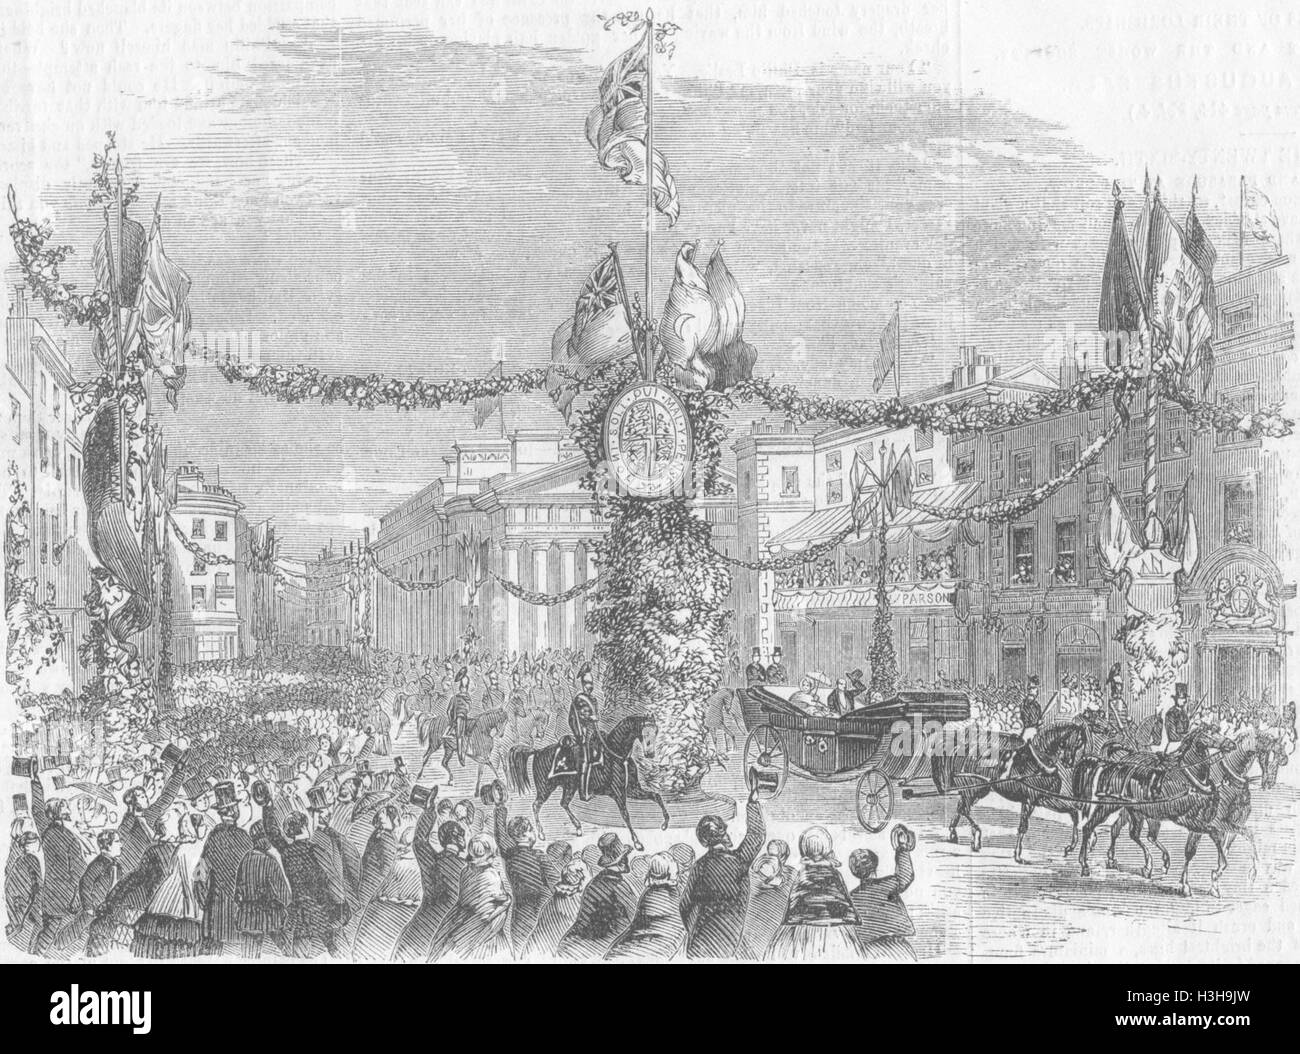 LANCS Queen, St Anne's Square, Manchester 1857. Illustrated Times Stock Photo